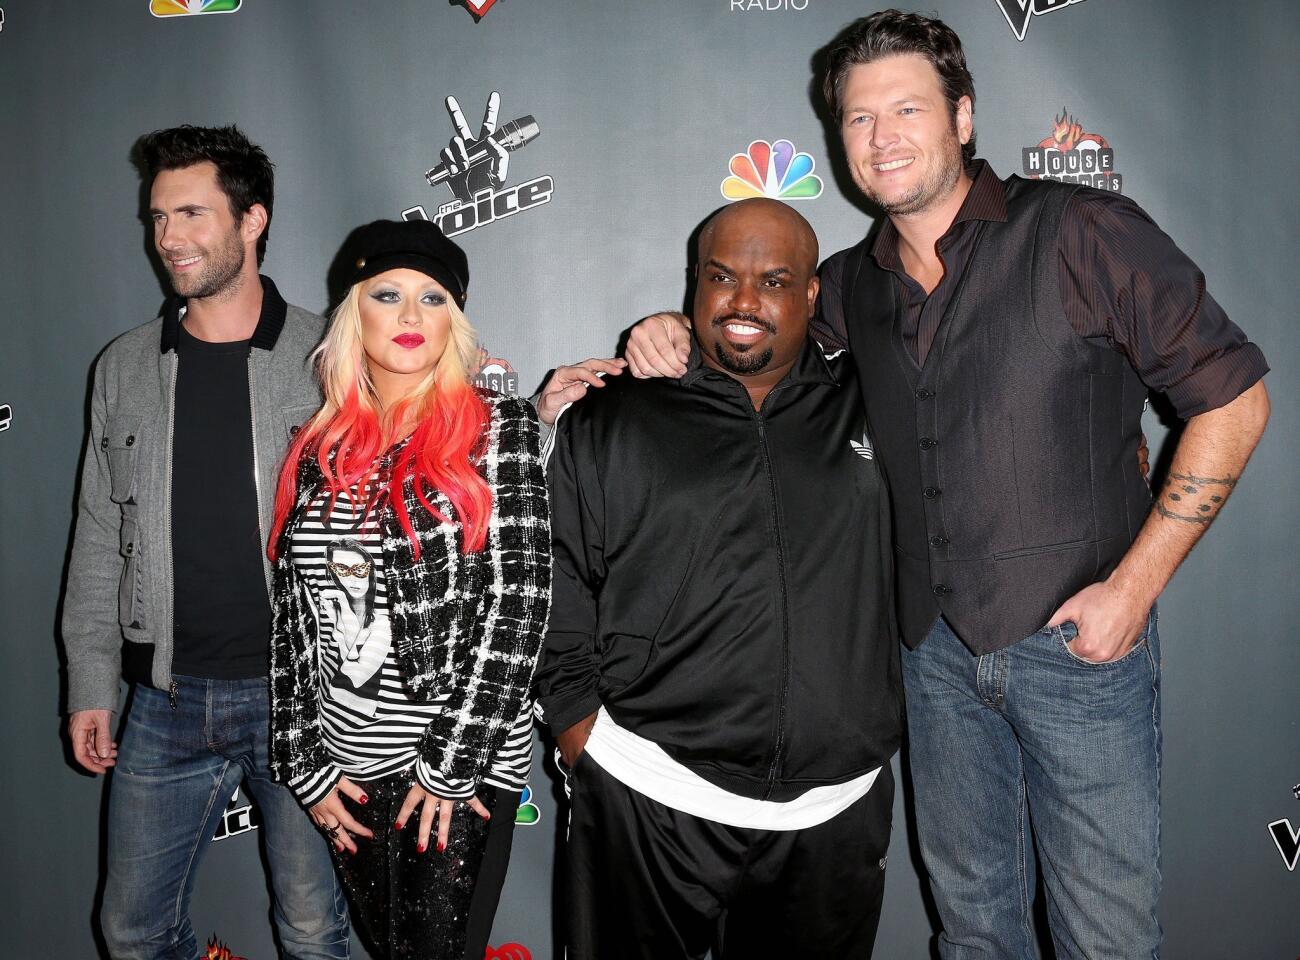 Over on "The Voice," CeeLo Green and Christina Aguilera, center, are sitting this season out to focus on other projects, like touring. Filling in their swirly red chairs are Usher and Shakira. If there's time, contestants on each show will actually sing.